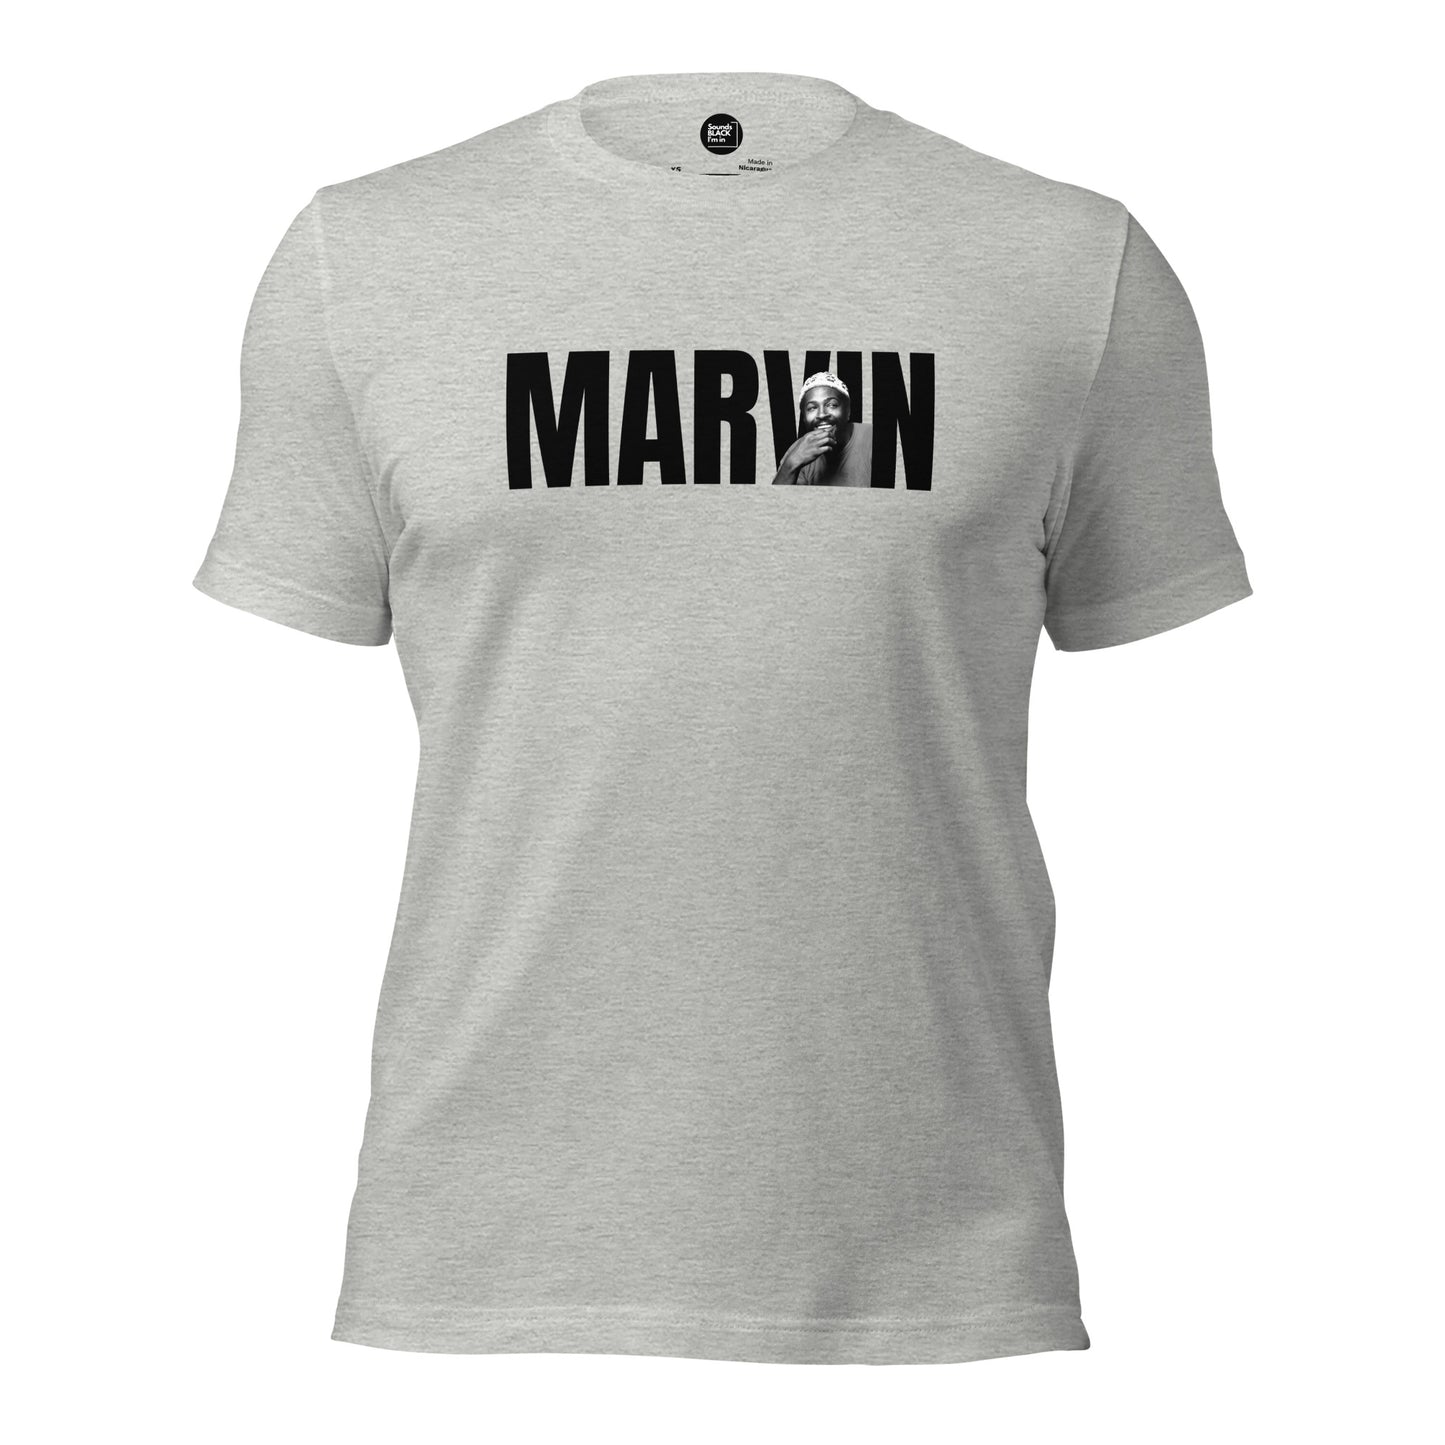 Marvin T-Shirt